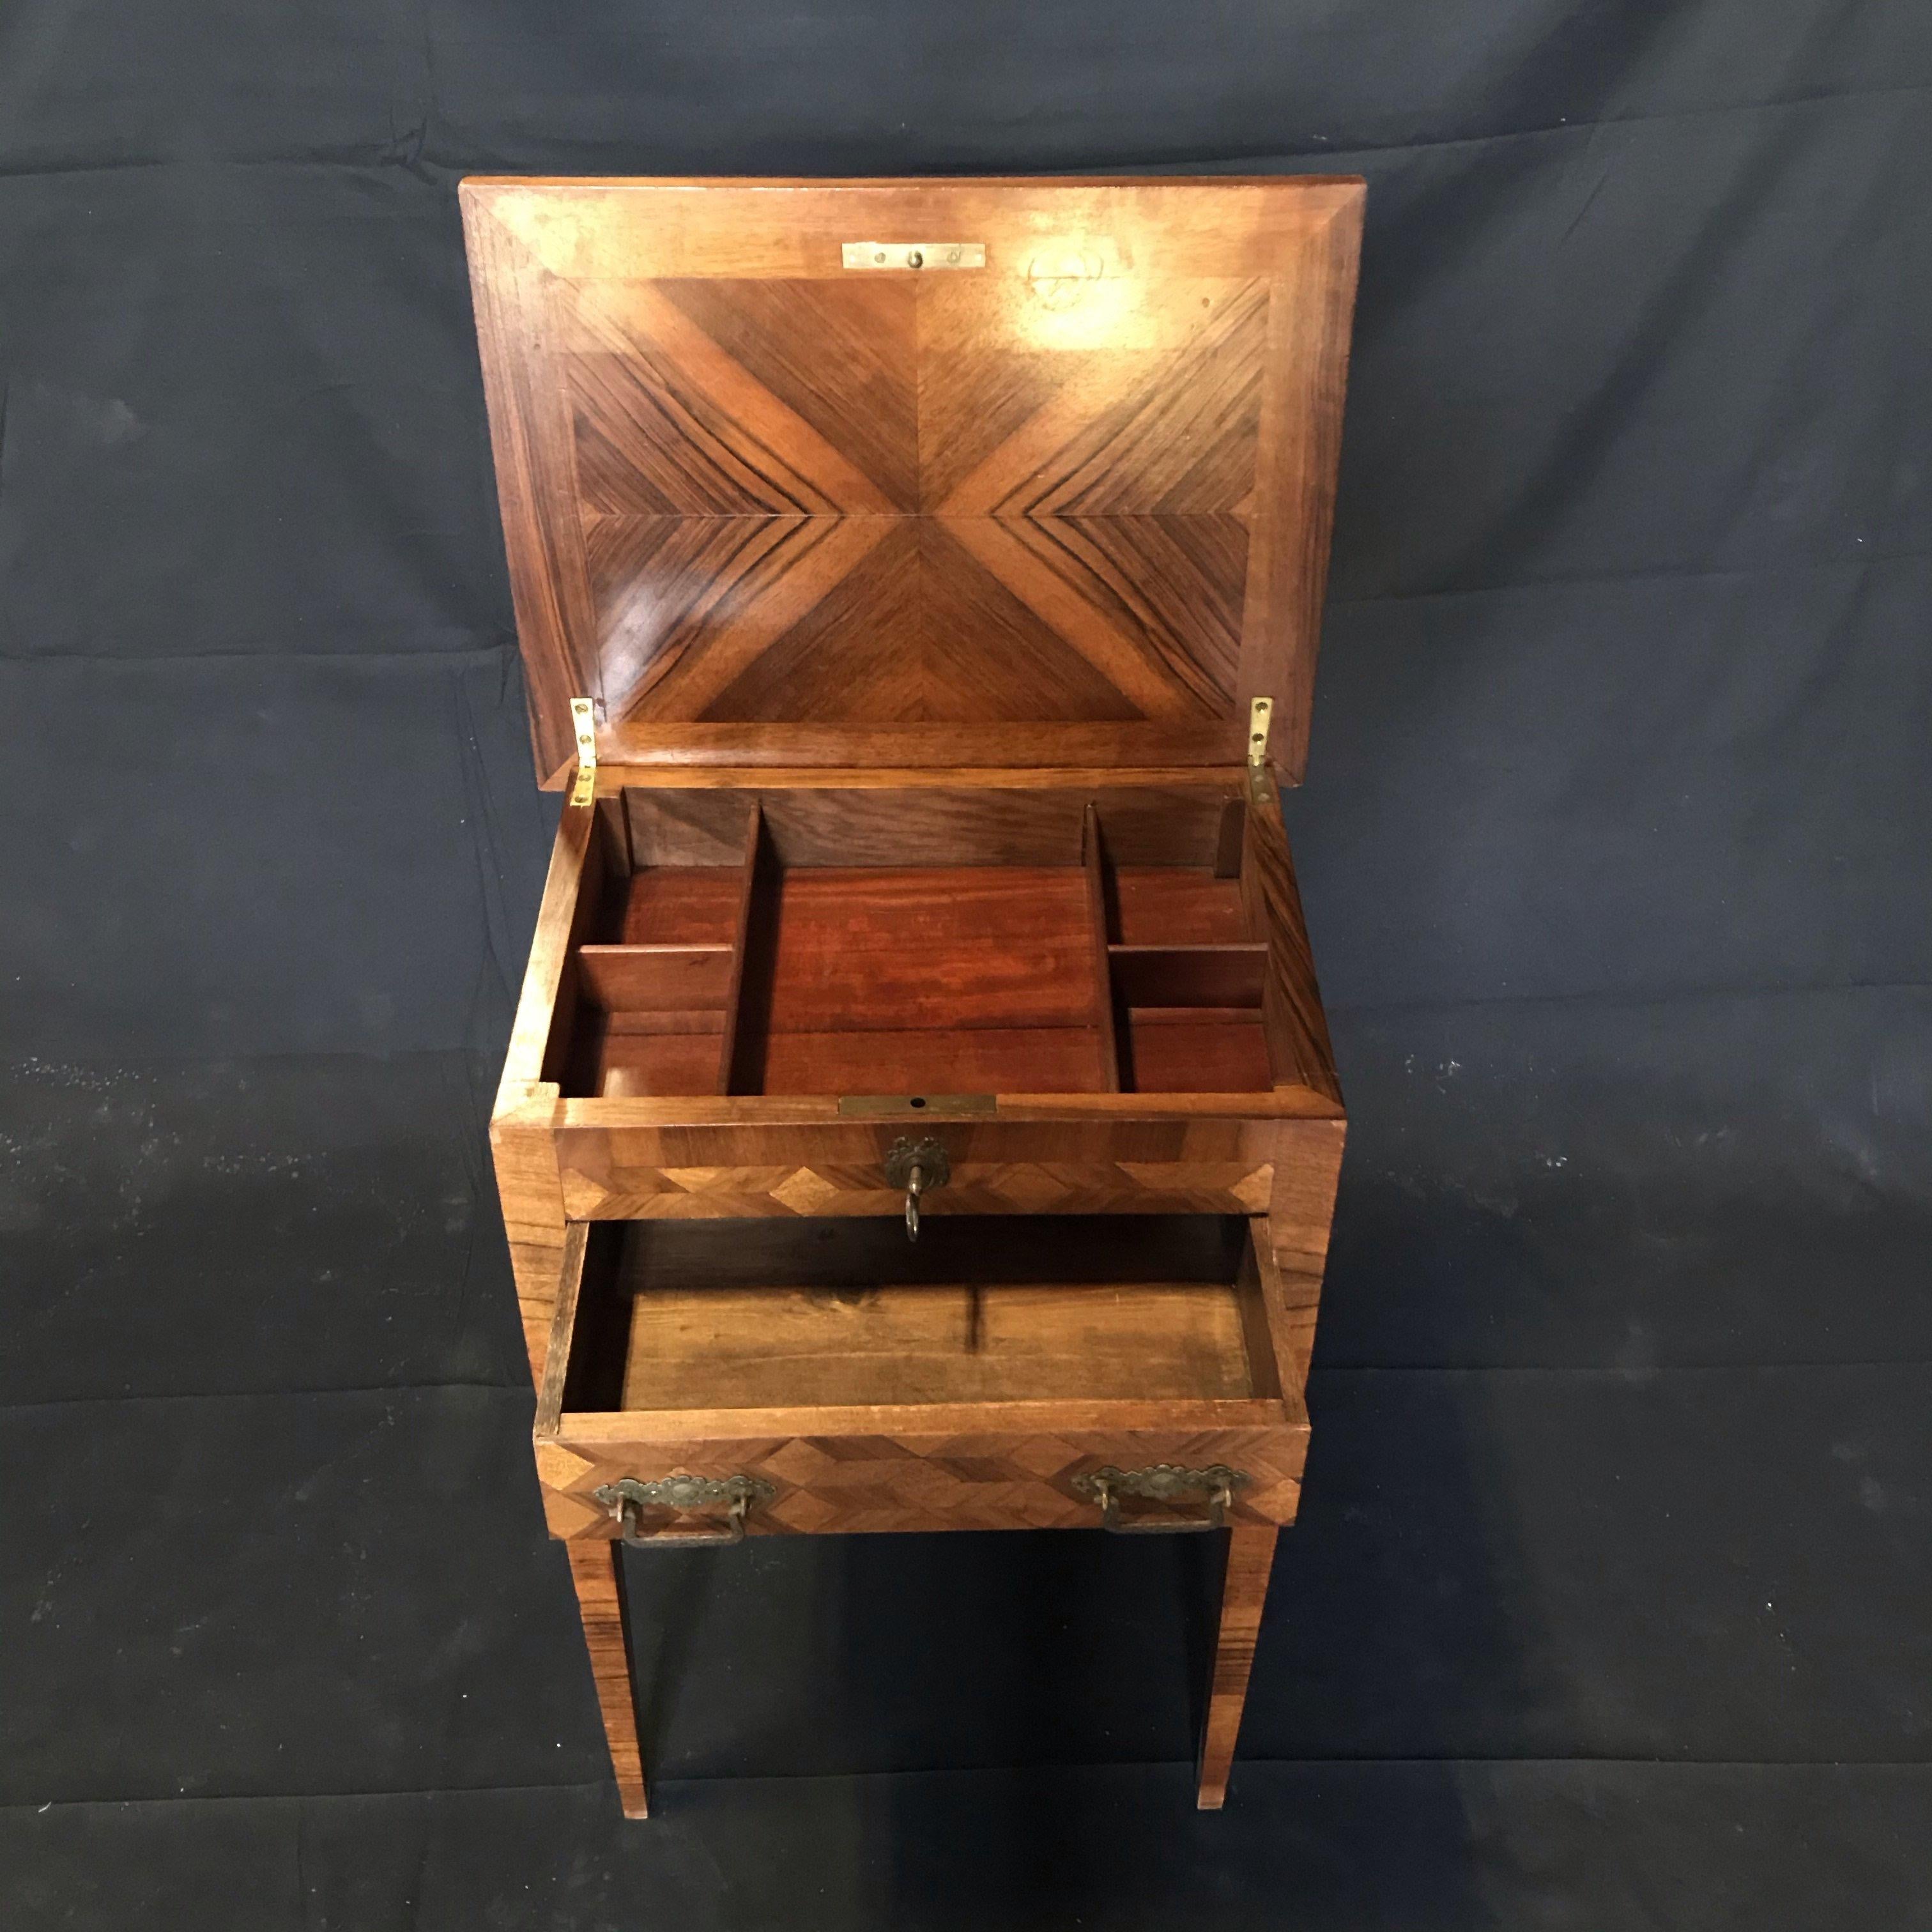 Bought in the South of France, this beautiful parquetry French walnut side table can also serve as a nightstand or sewing table. The top opens to reveal one large center and four side compartments with drawer underneath. Comes with original working